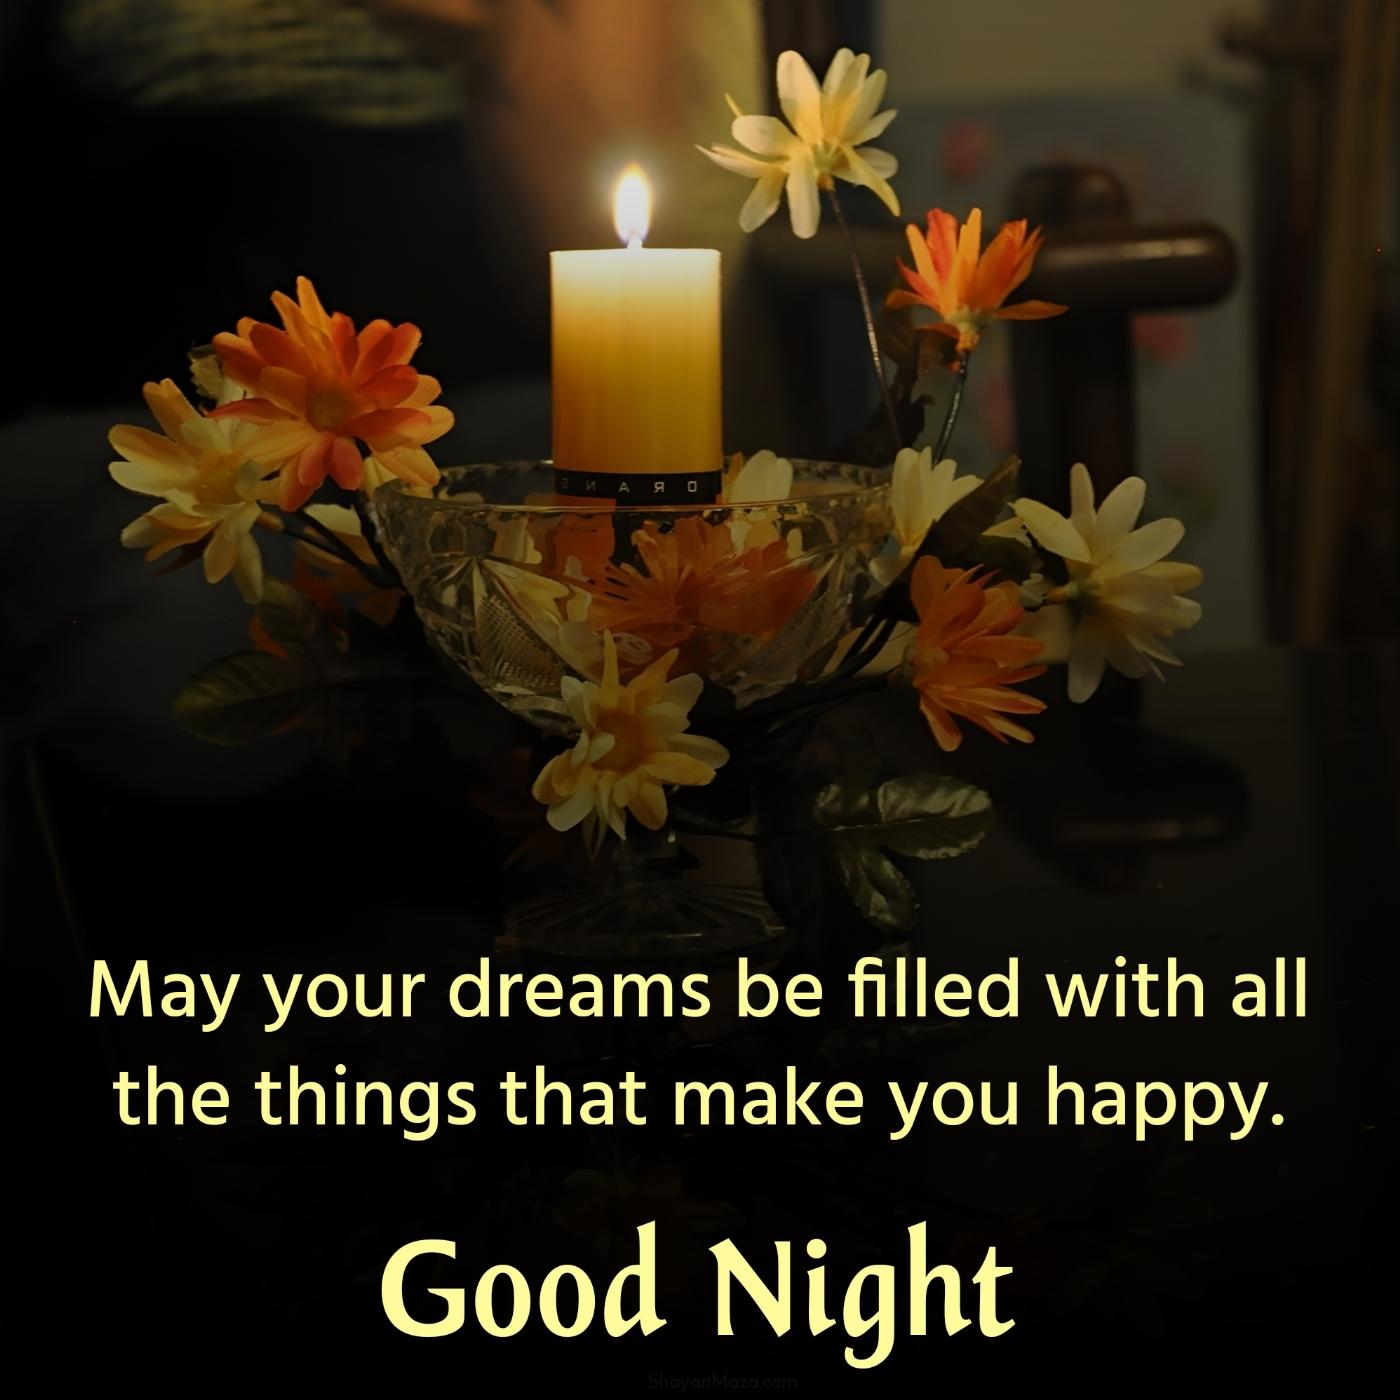 May your dreams be filled with all the things